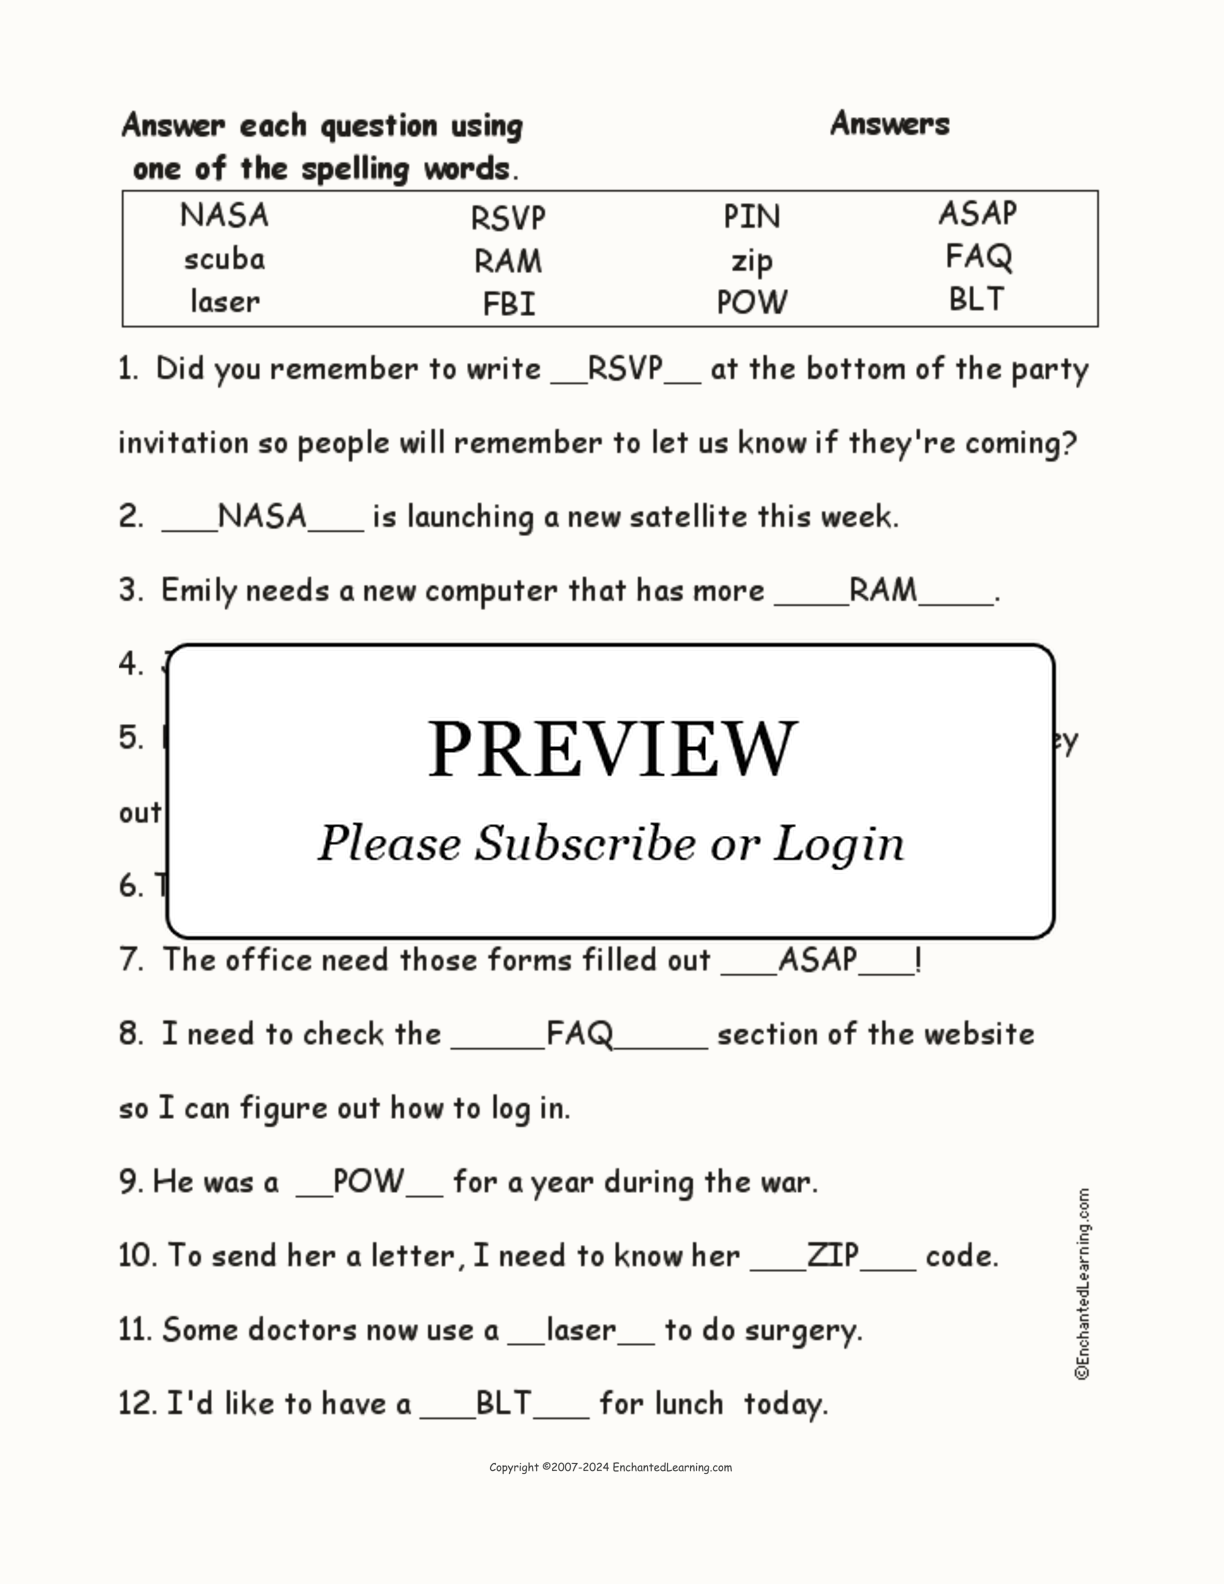 Acronyms Spelling Word Questions interactive worksheet page 2